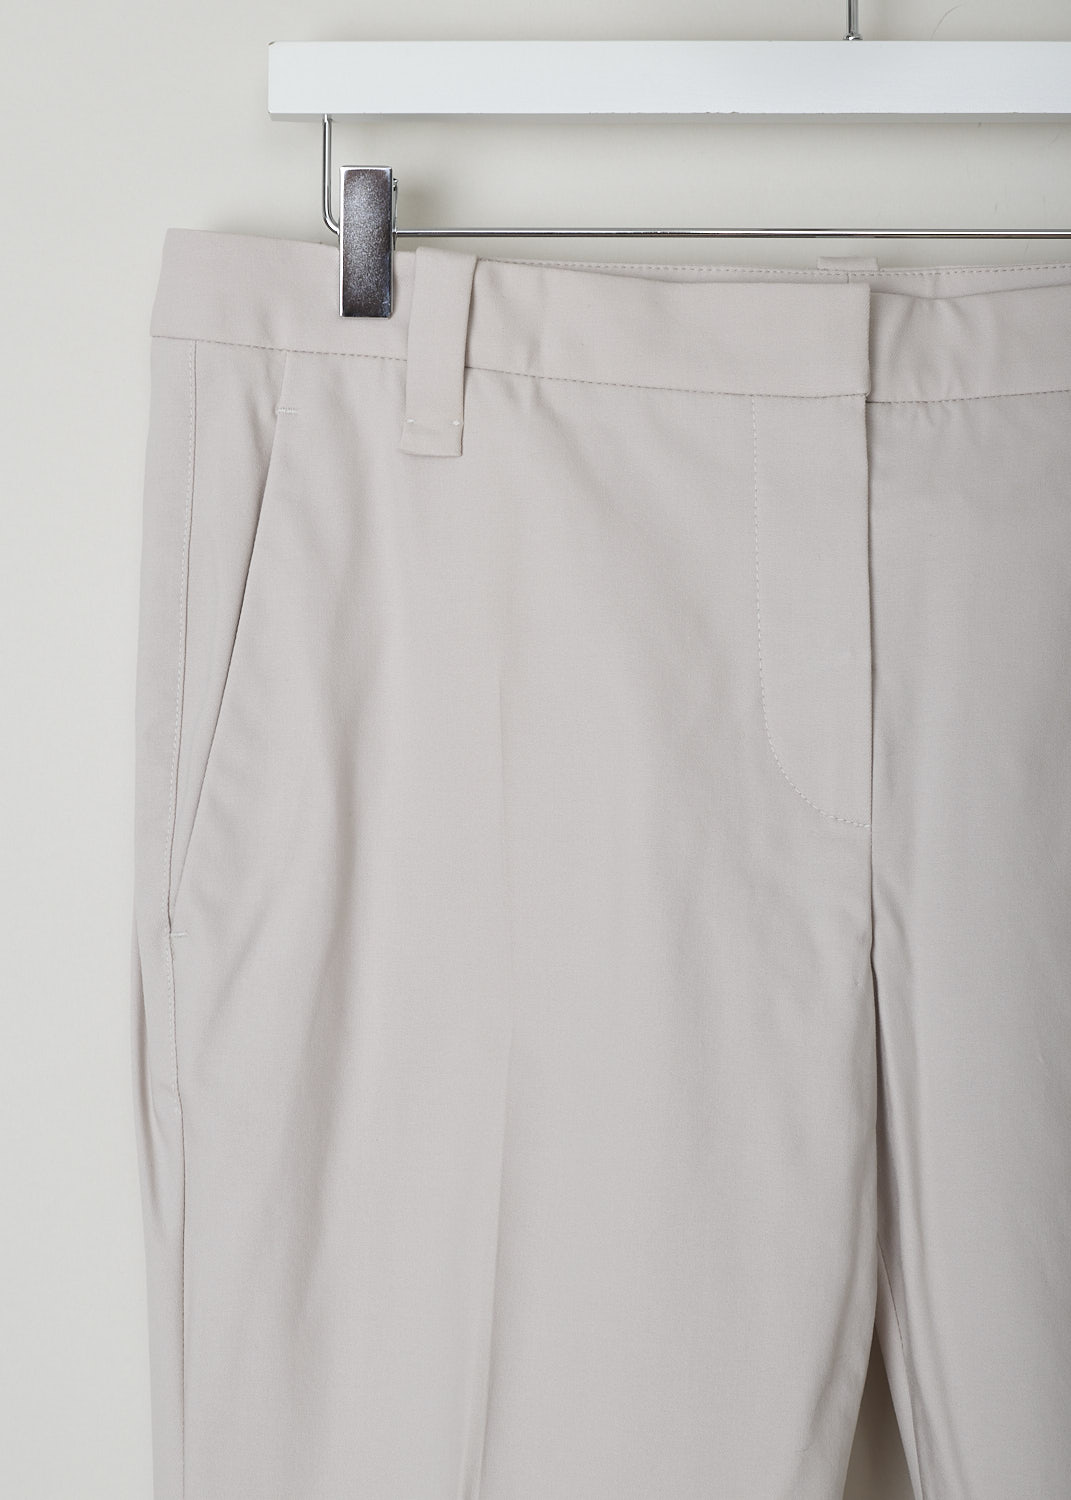 BRUNELLO CUCINELLI, BEIGE MID-RISE PANTS, M0F70P1995_C2837, Beige, Detail, These beige mid-rise pants have a waistband with belt loops and a concealed clasp and zip closure. In the front, these pants have slanted pockets. In the back, two welt pocket can be found. Centre creases run along the length of the tapered leg.
